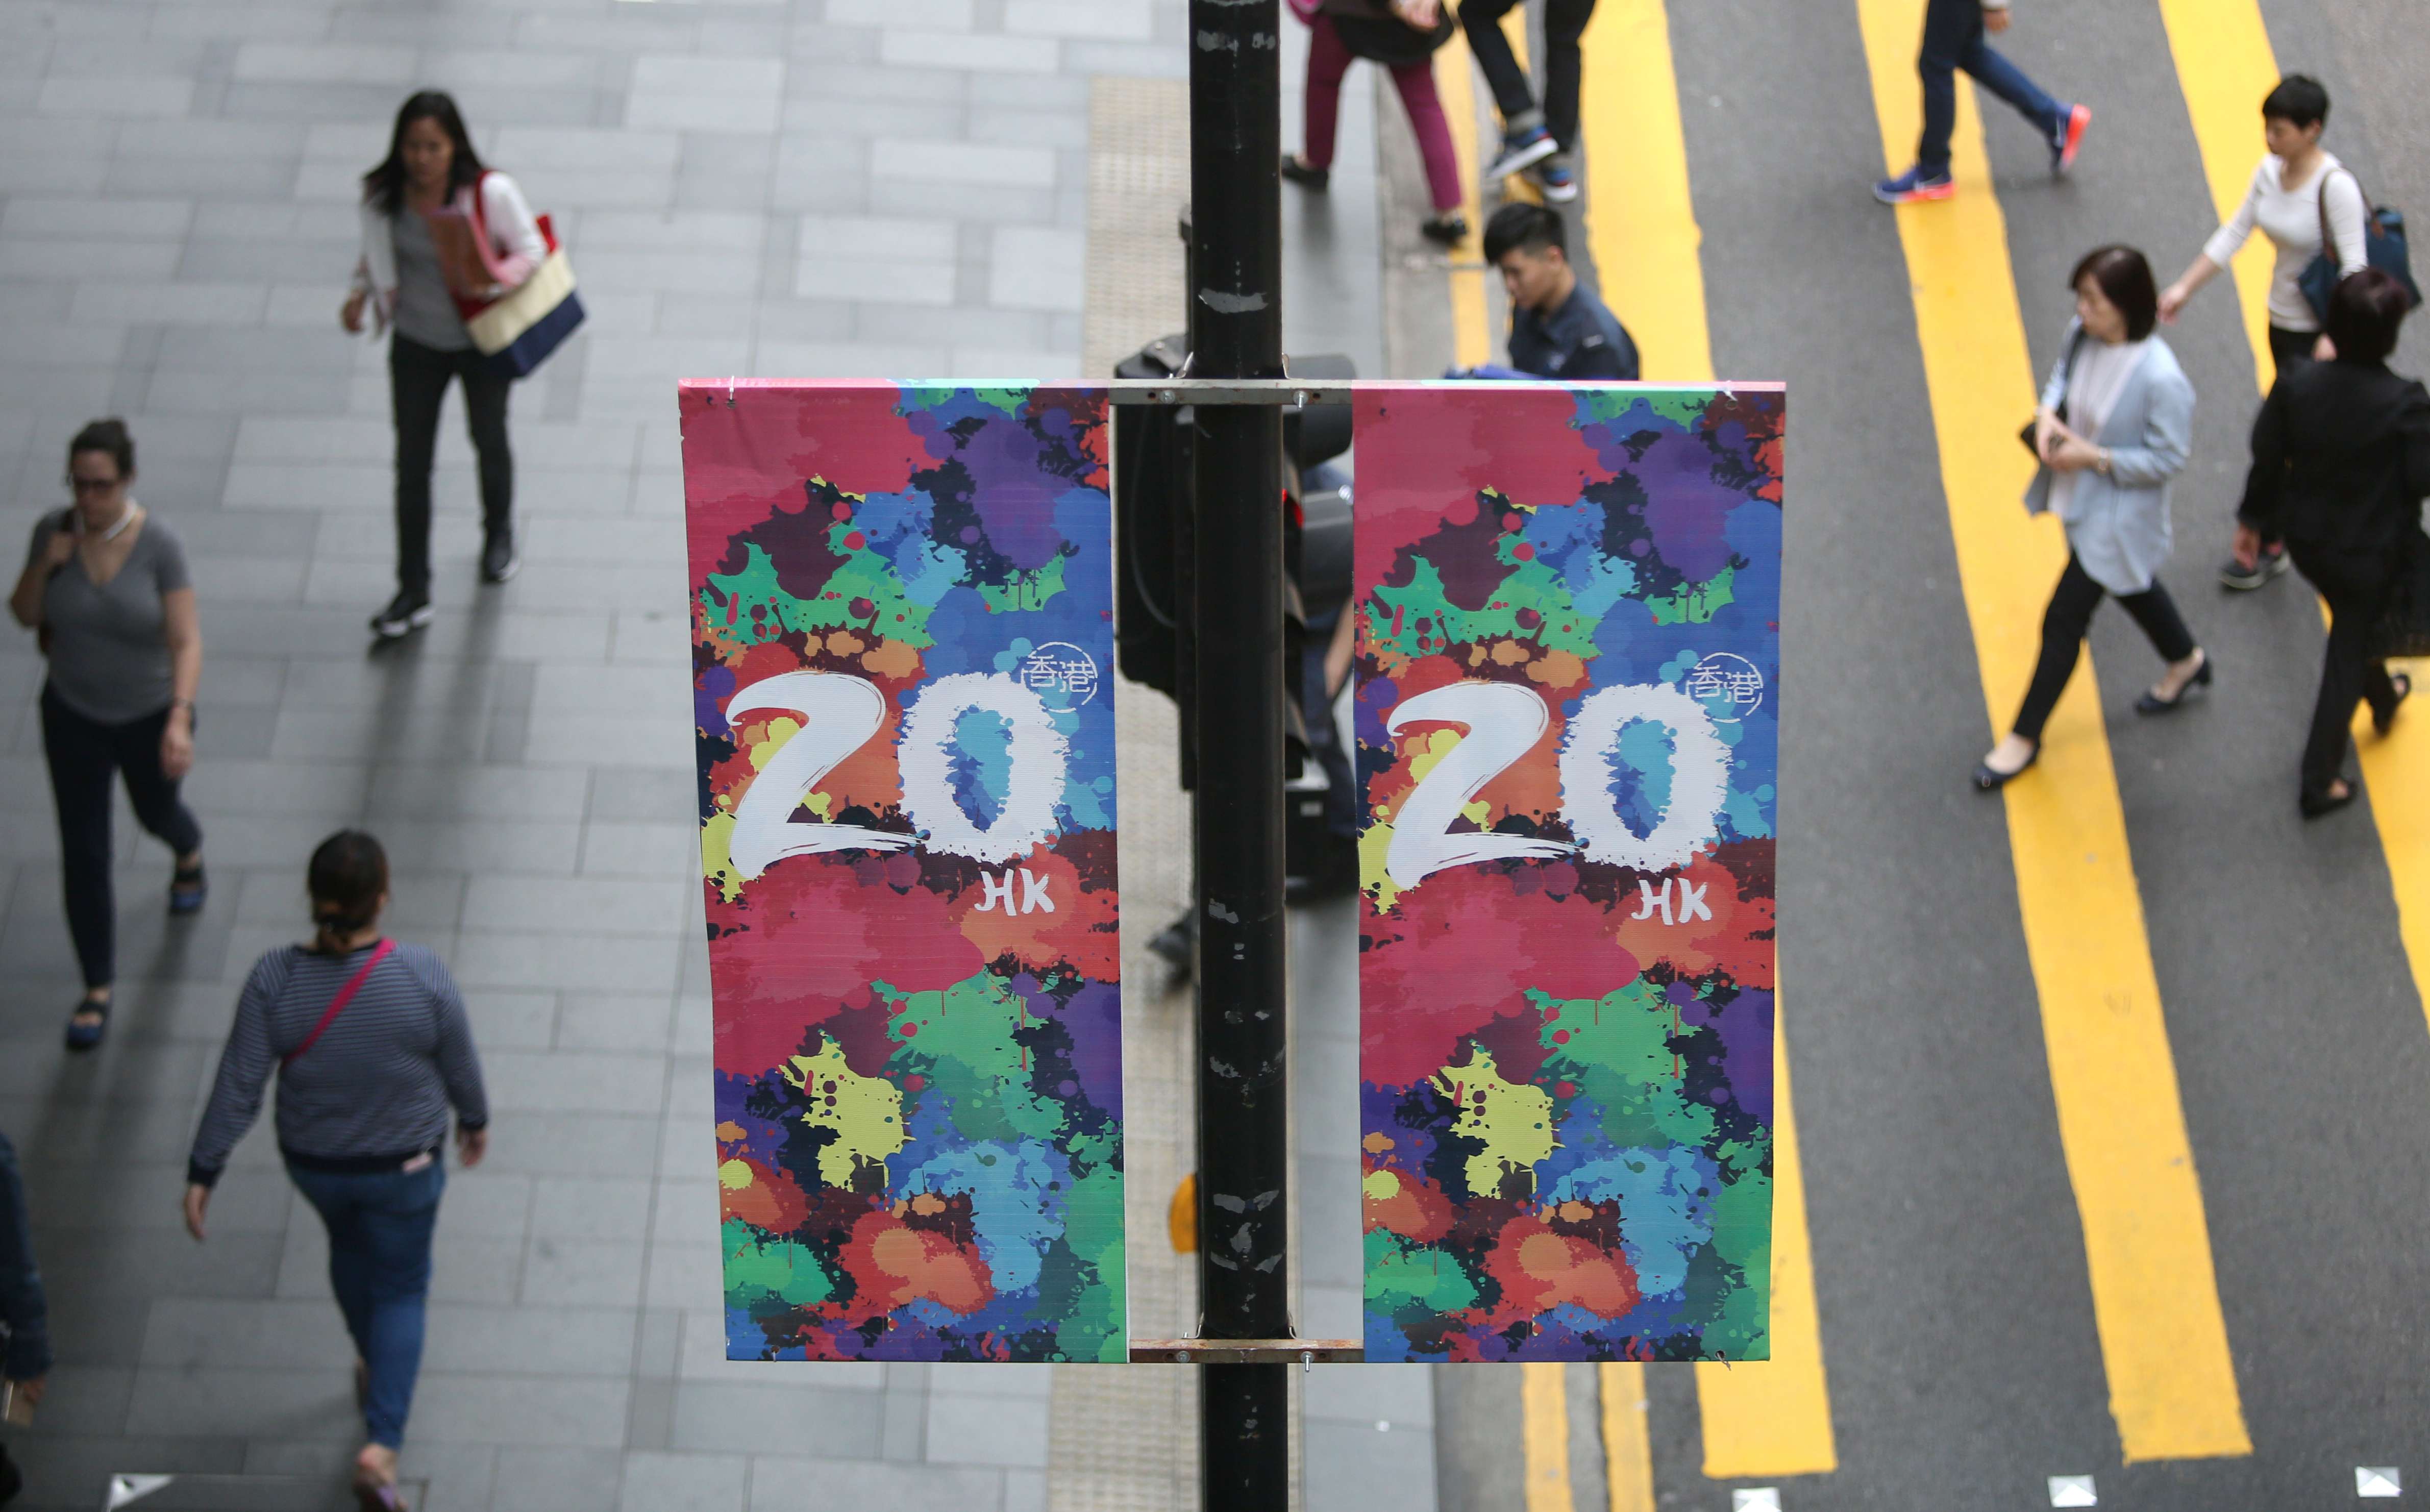 A number of new programmes are being rolled out to “dress up” the city in a way that will add a fresh look or dash of colour to the cityscape. Photo: Sam Tsang